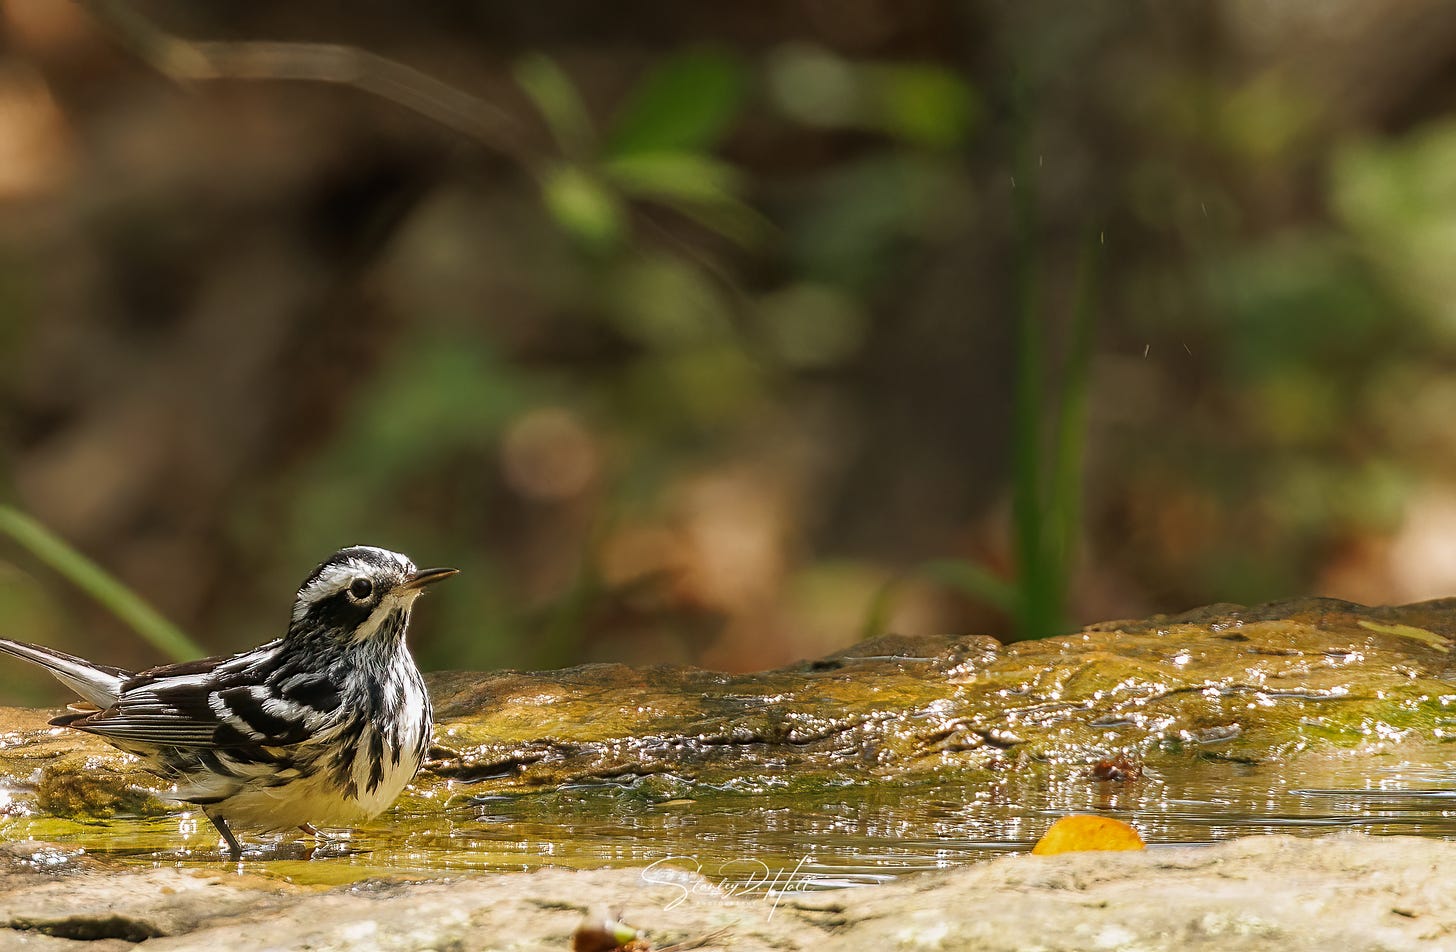 a single black and white warbler standing on rock with a puddle of water with a blurred background behind him